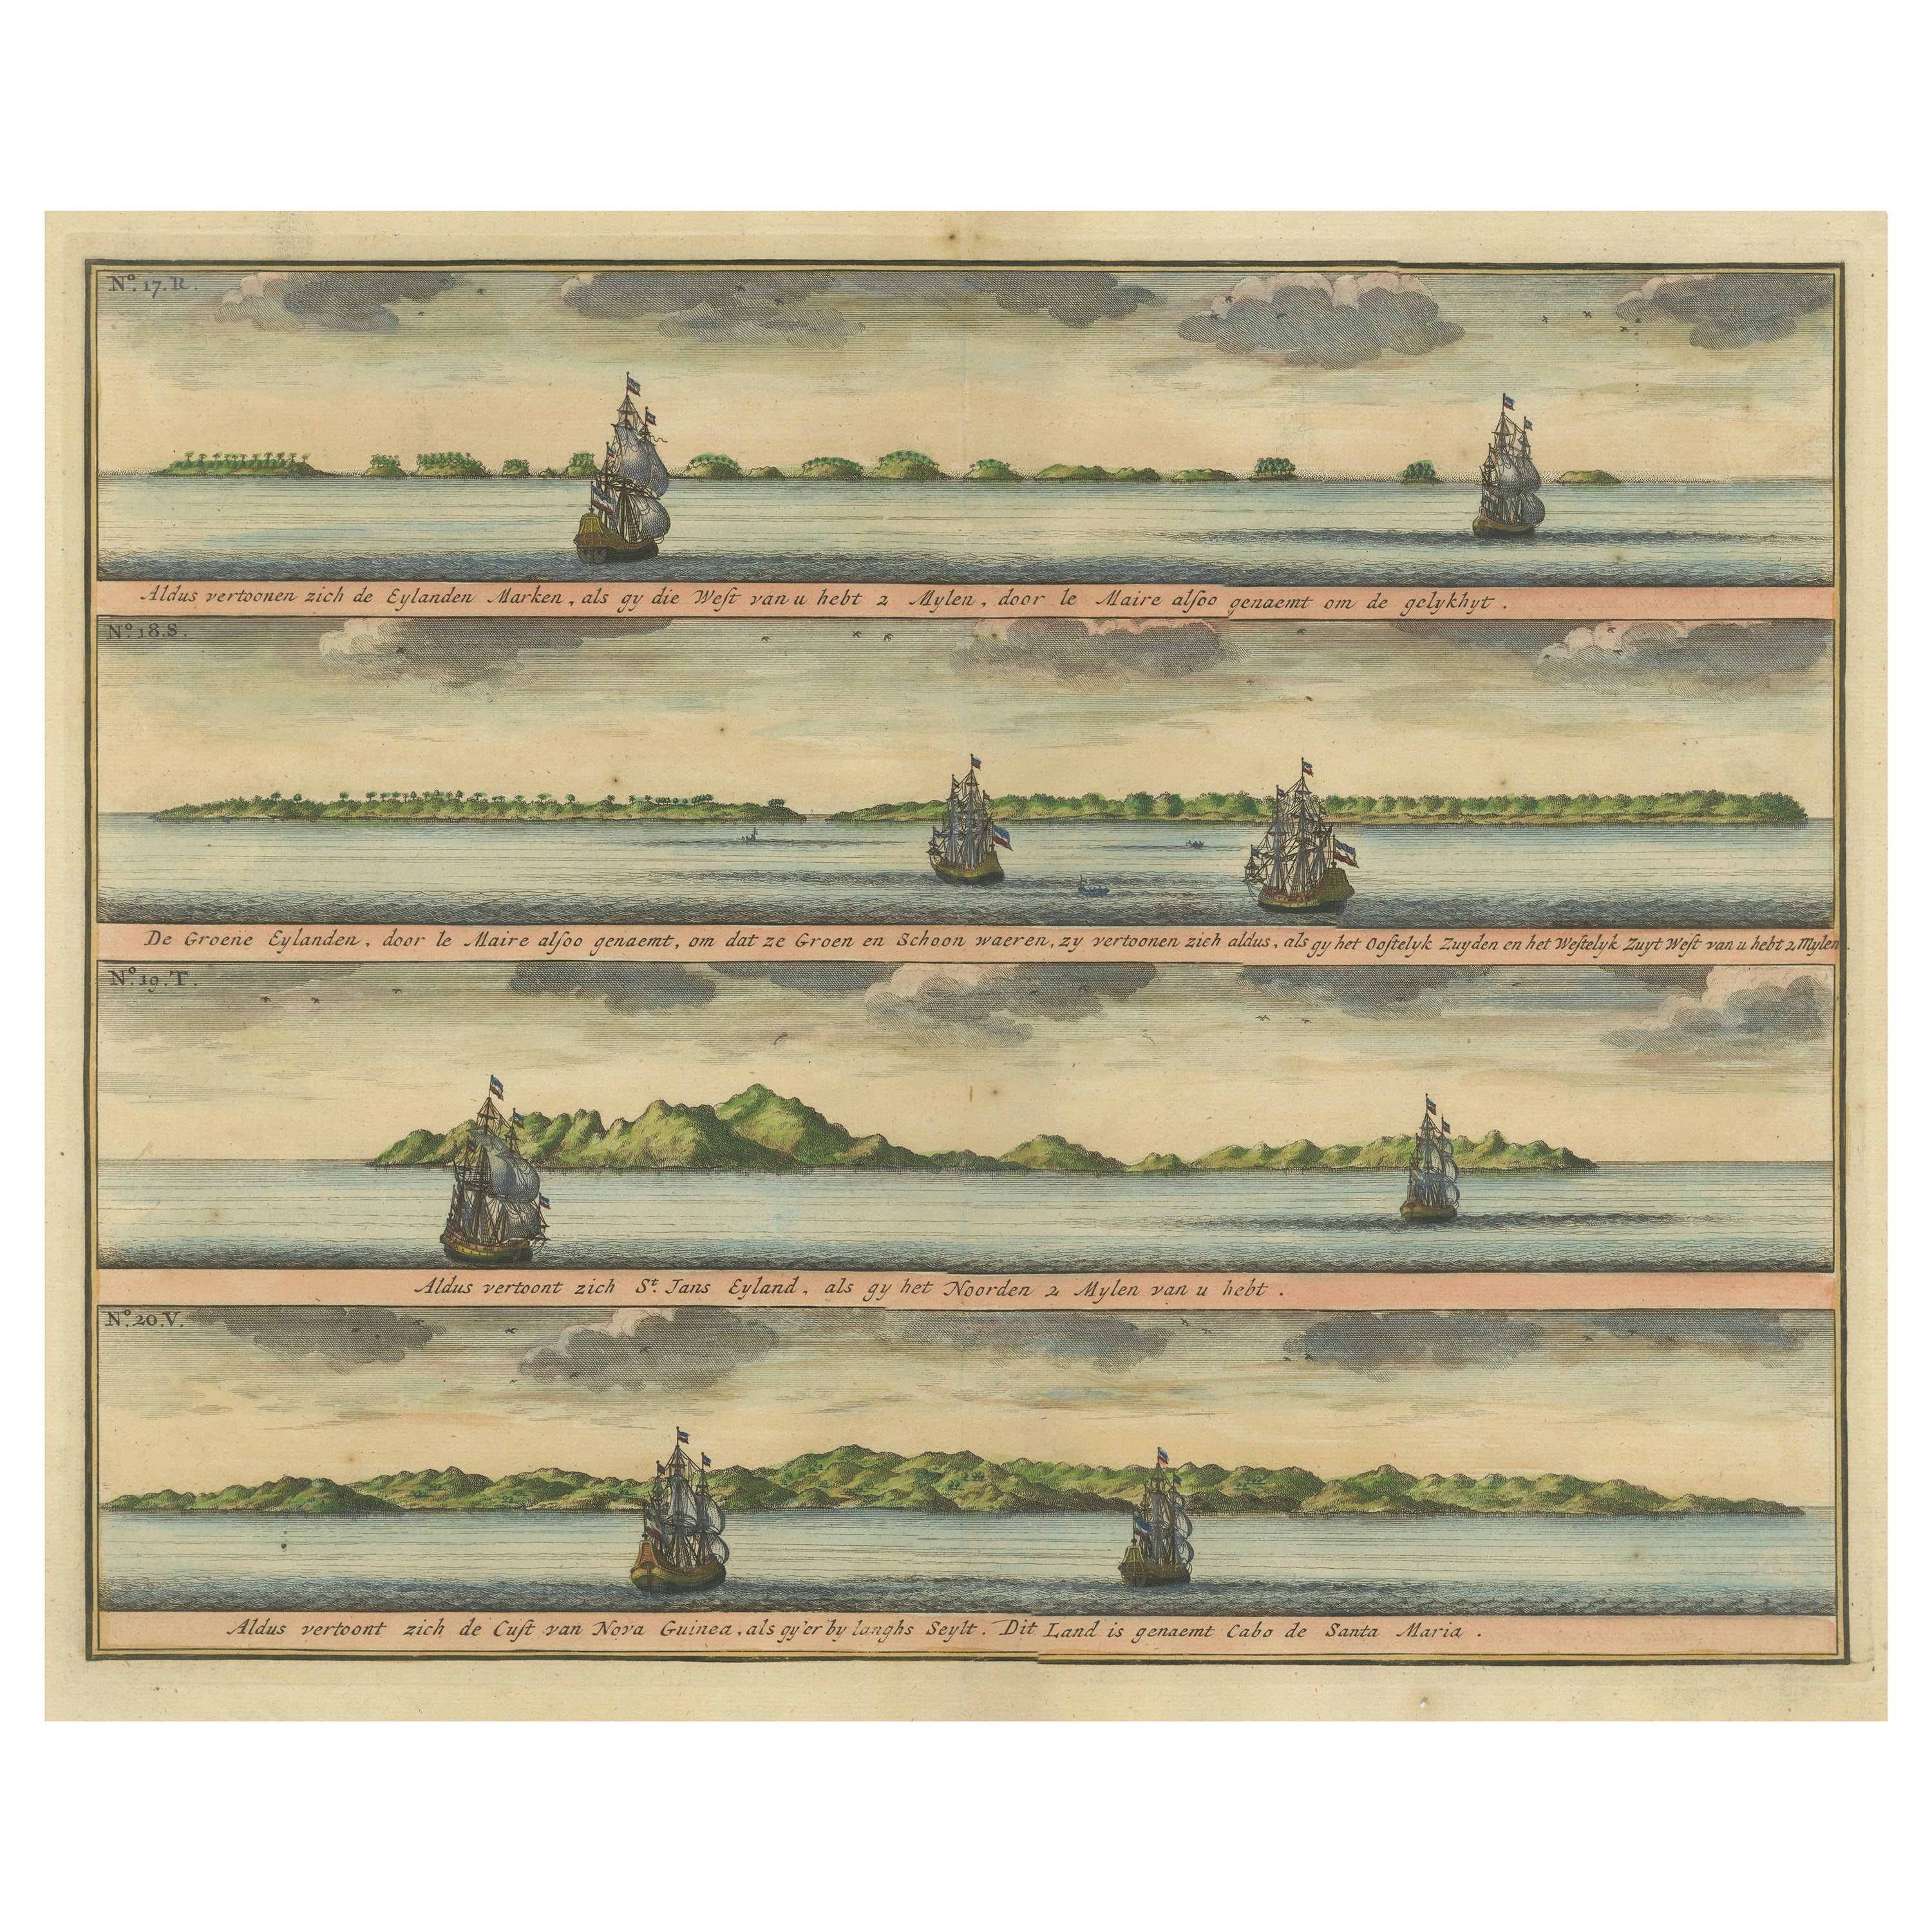 Colored Antique Print of the Islands of Marken, New Ireland and Other Islands For Sale